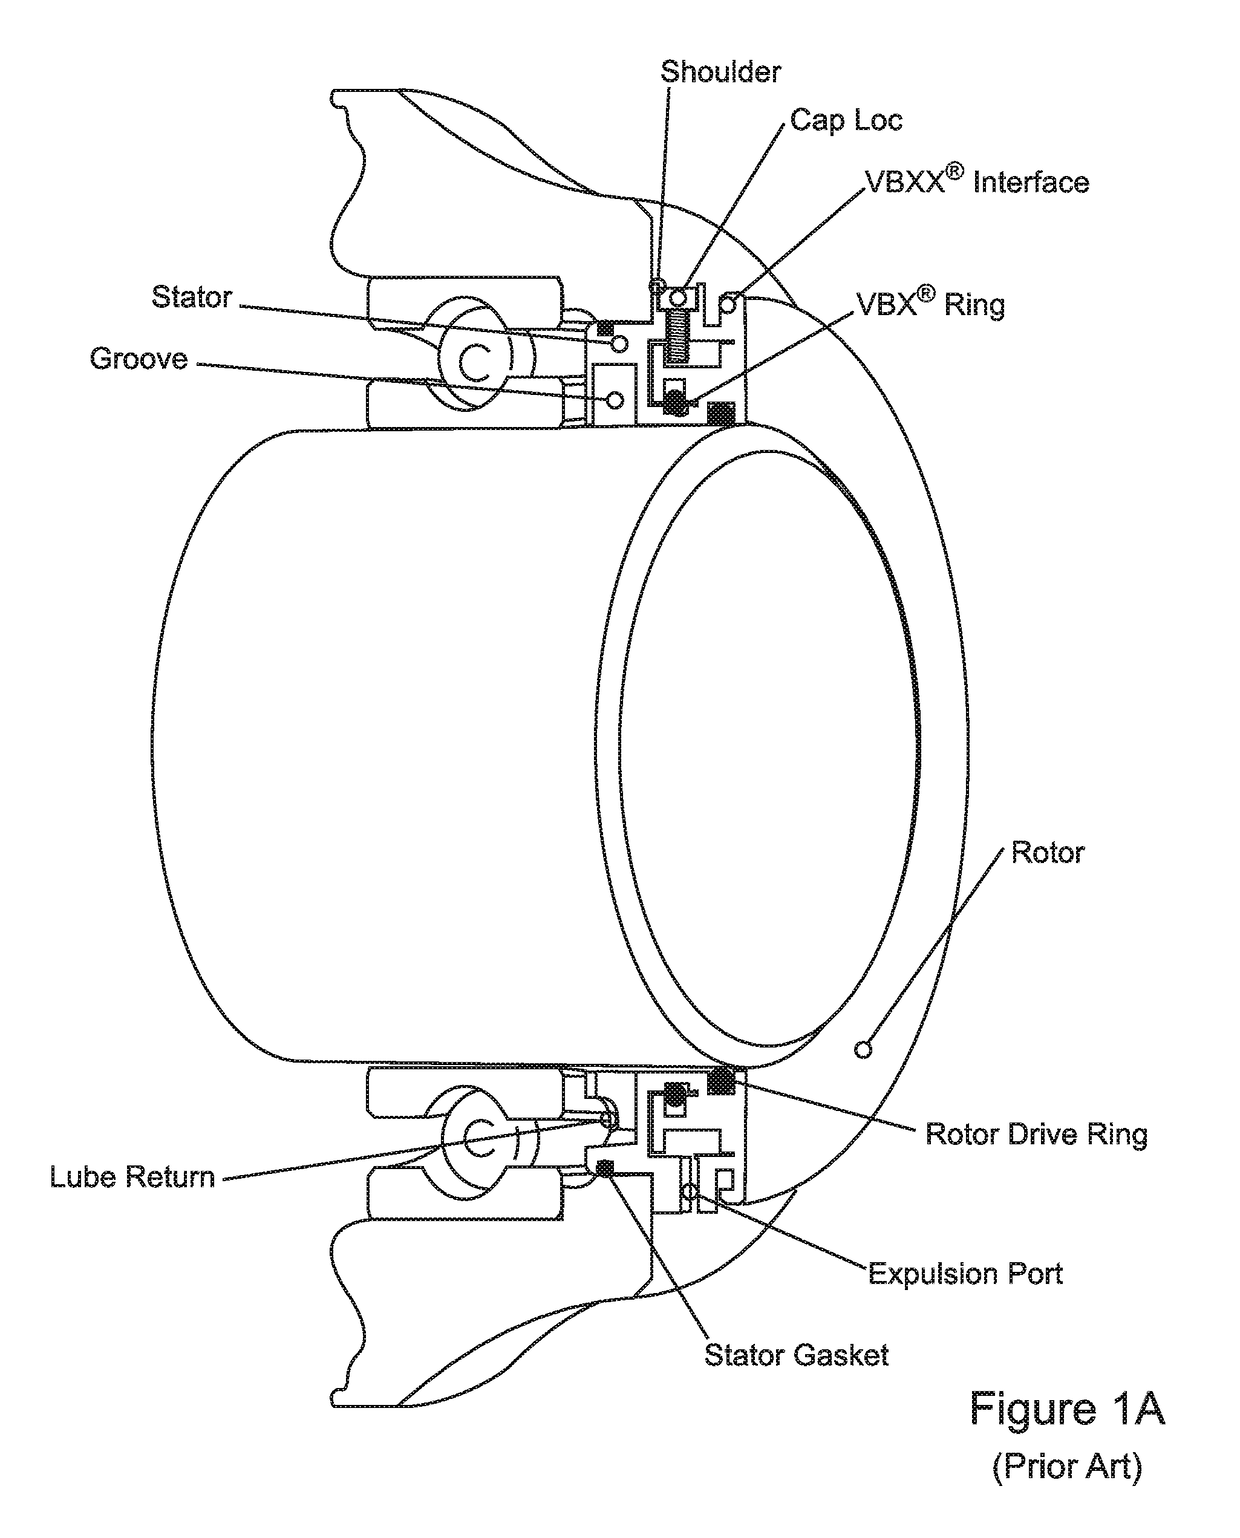 Bearing isolator seal with tapered static shutoff O-ring interface